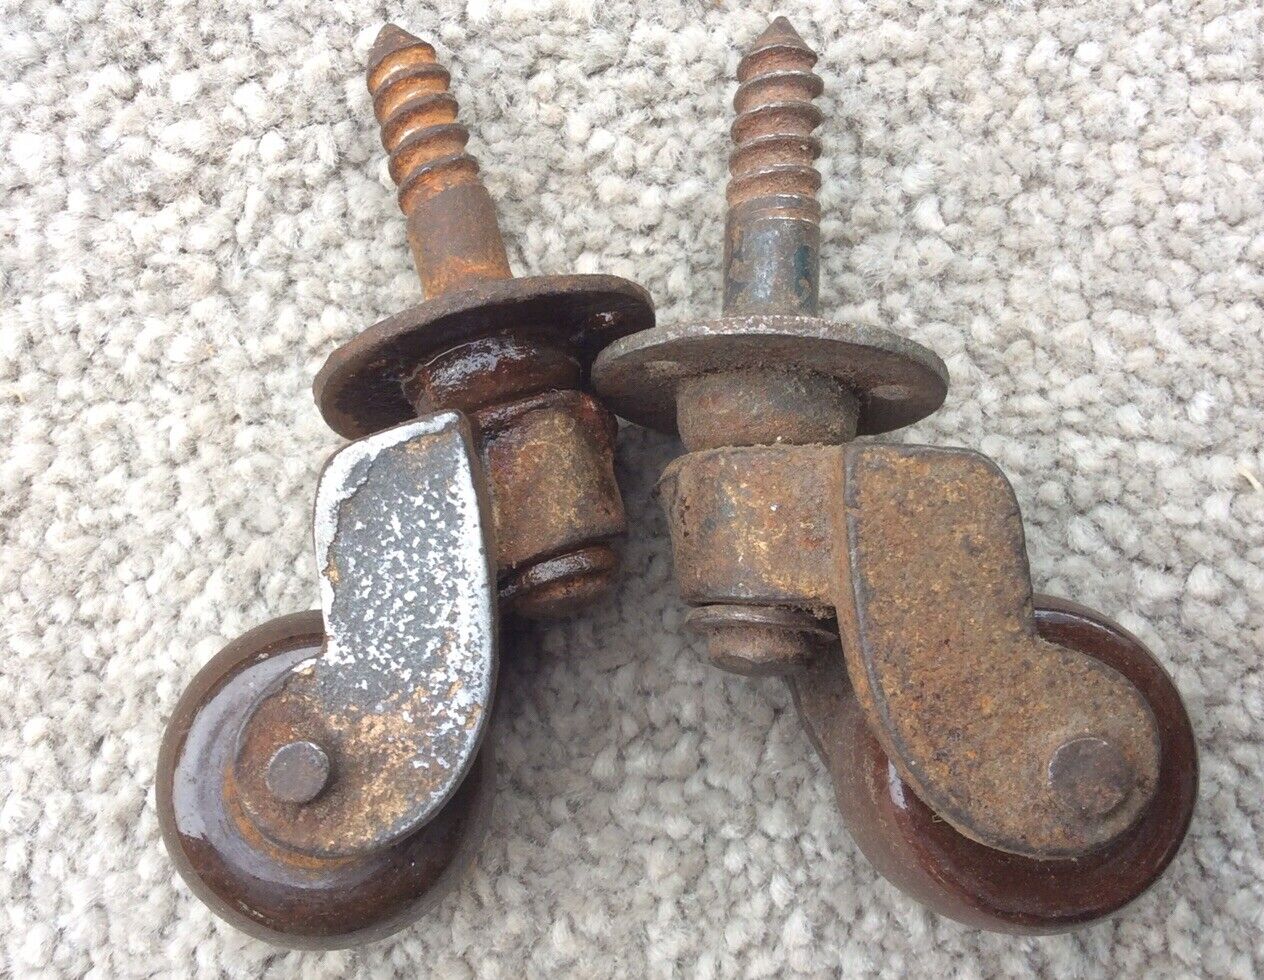 Antique Valuations: A Pair of Small Antique Brass Castors with Brown porcelain wheels